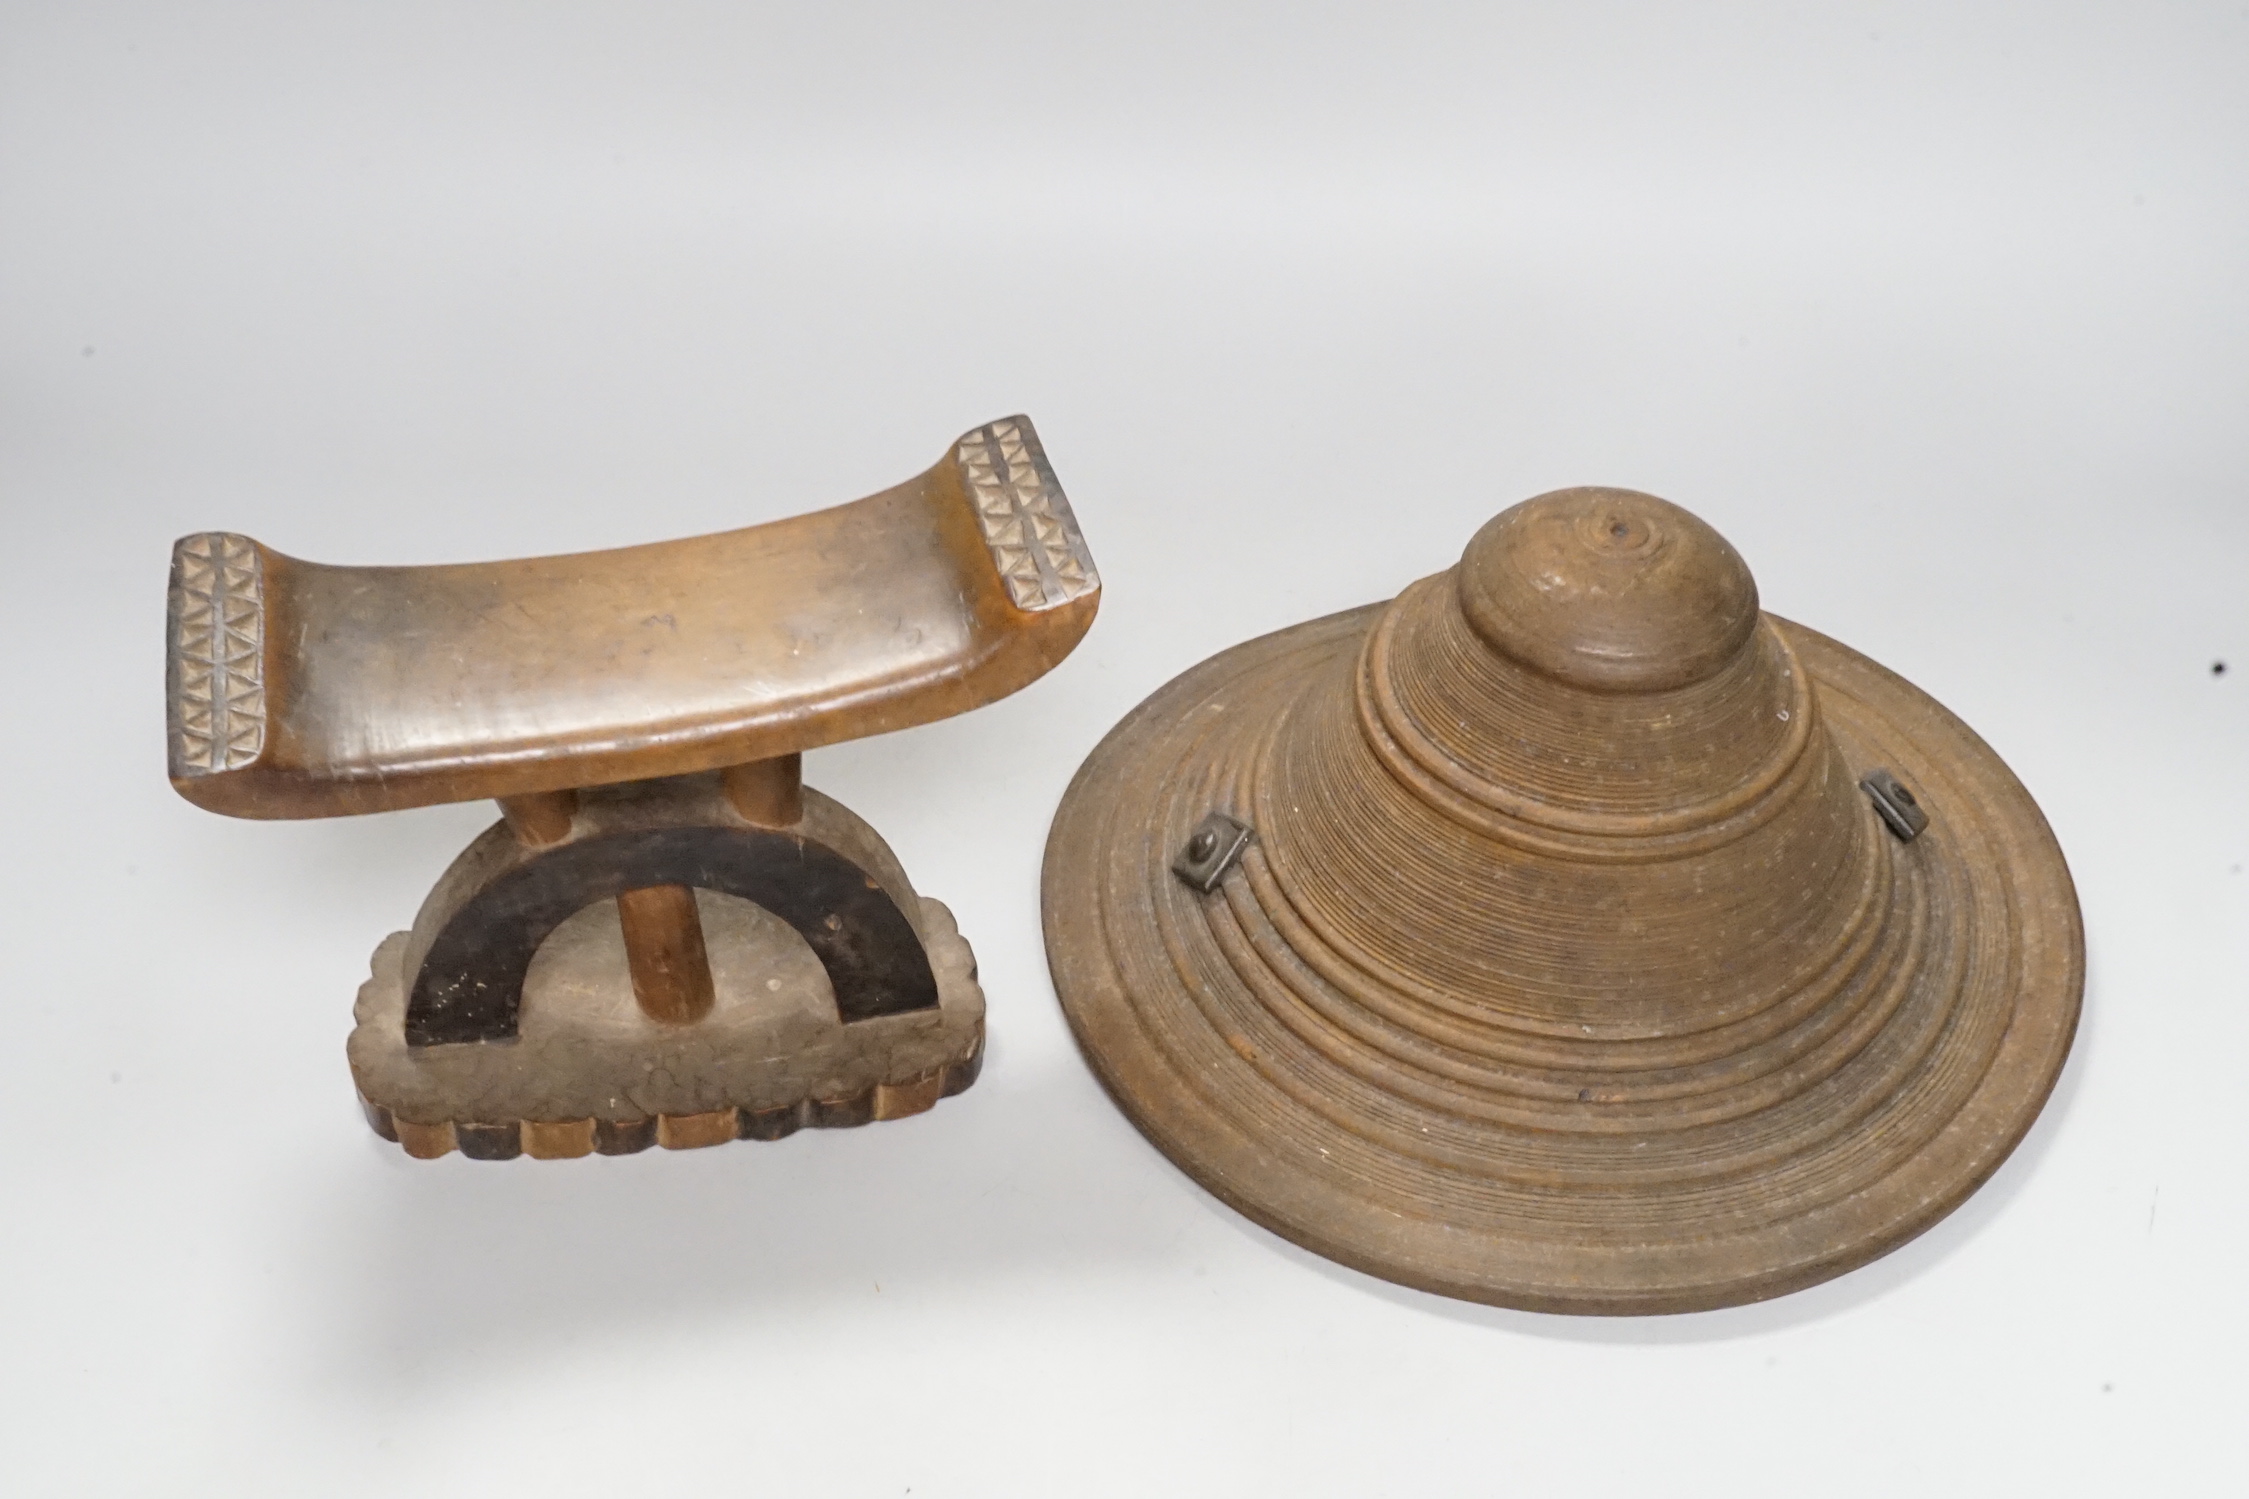 An Ashanti wood headrest and a small African wood shield